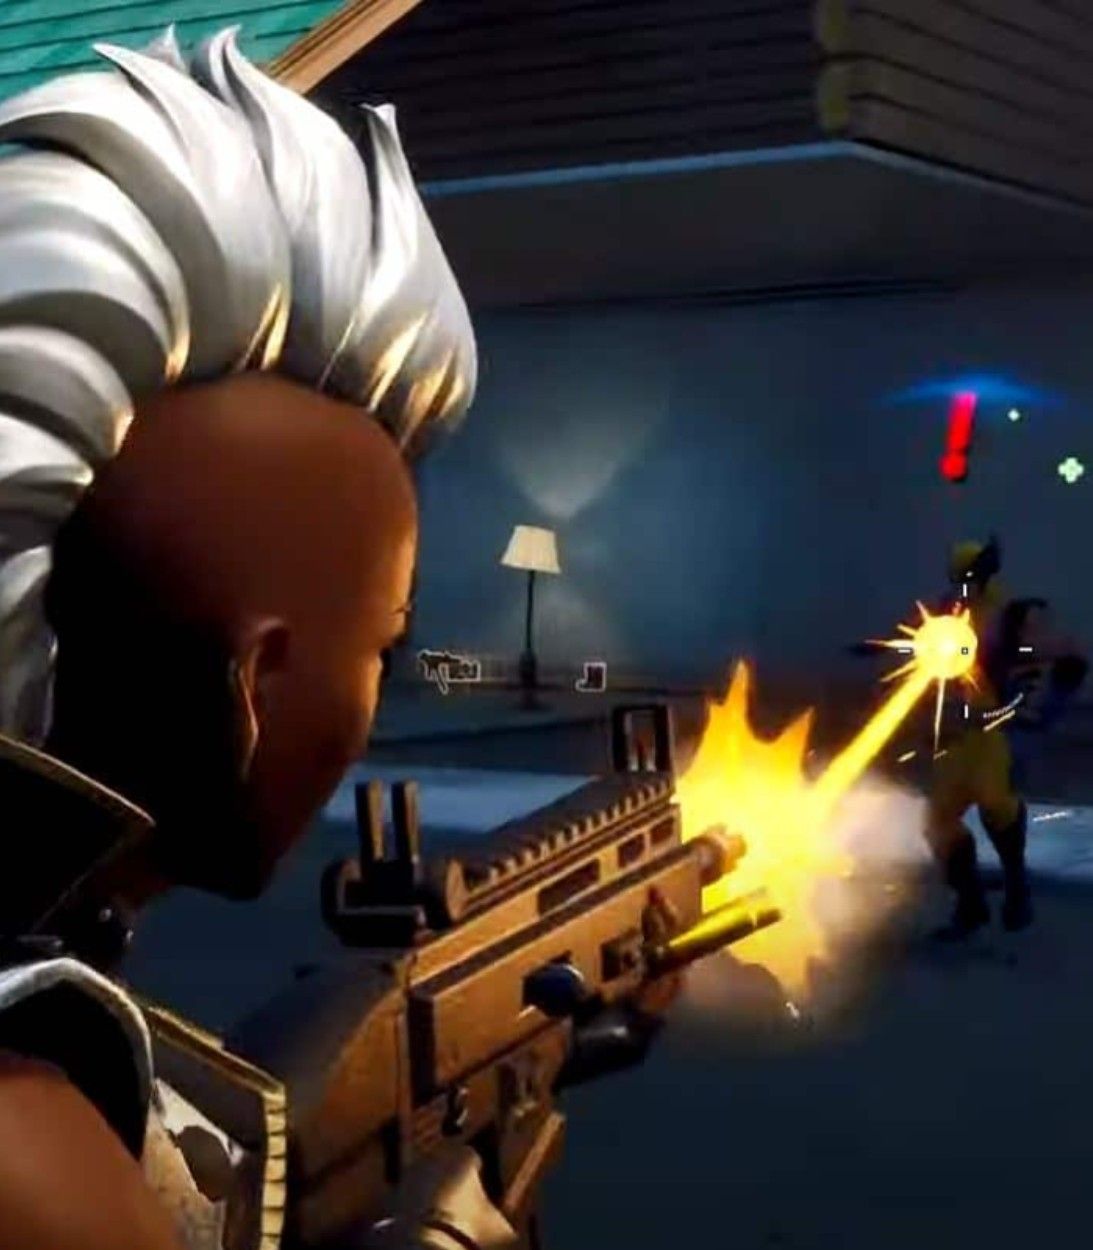 A player in the Storm skin eliminates Wolverine in Fortnite Season 4